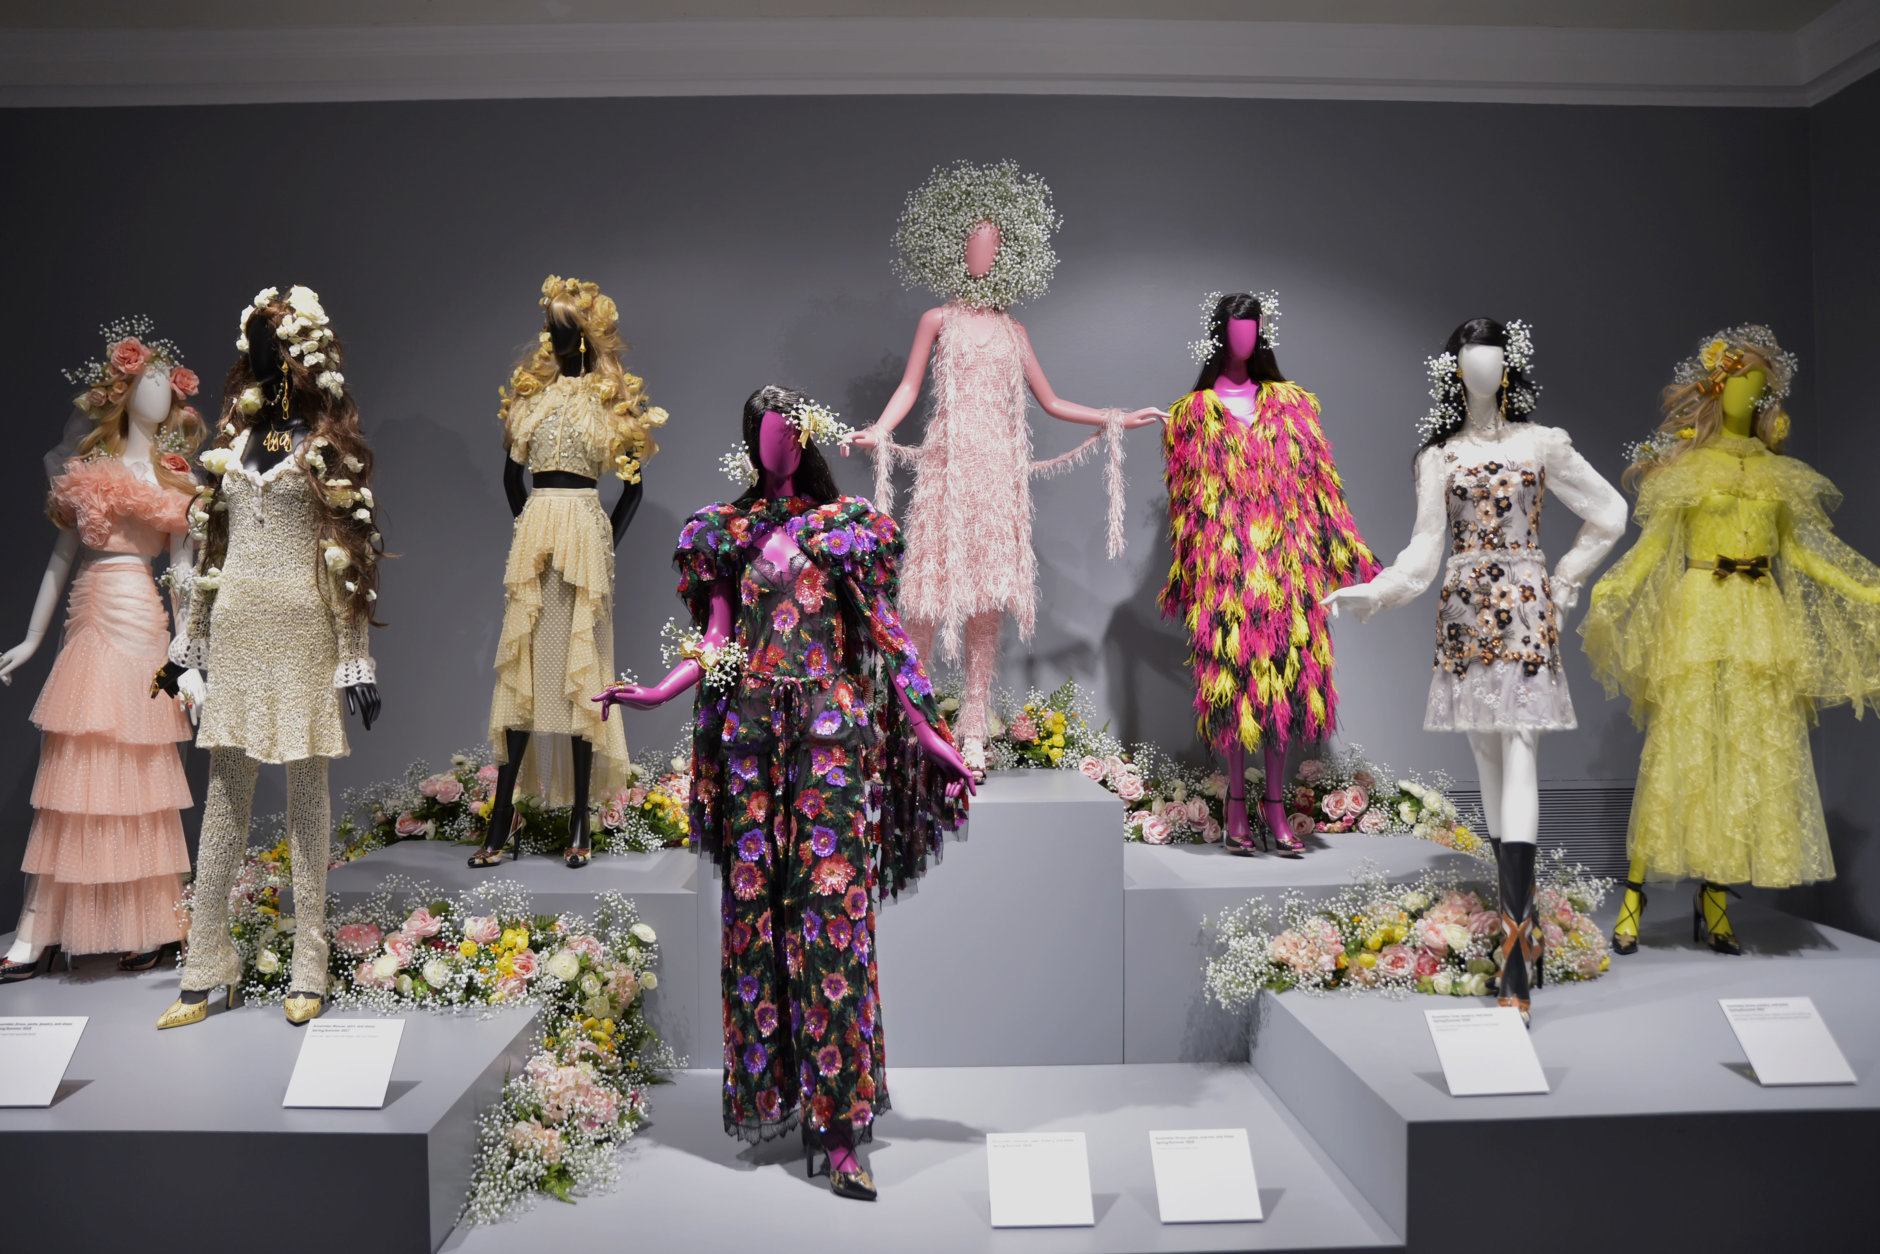 Ensembles from the Spring/Summer 2017 and 2018 collections from the American luxury fashion house, Rodarte - a part of the National Museum of Women in the Arts' first fashion exhibition, "Rodarte", on view now through February 10, 2019. (Courtesy Shannon Finney/<a href="https://www.shannonfinneyphotography.com/index" target="_blank" rel="noopener noreferrer">shannonfinneyphotography.com</a>)